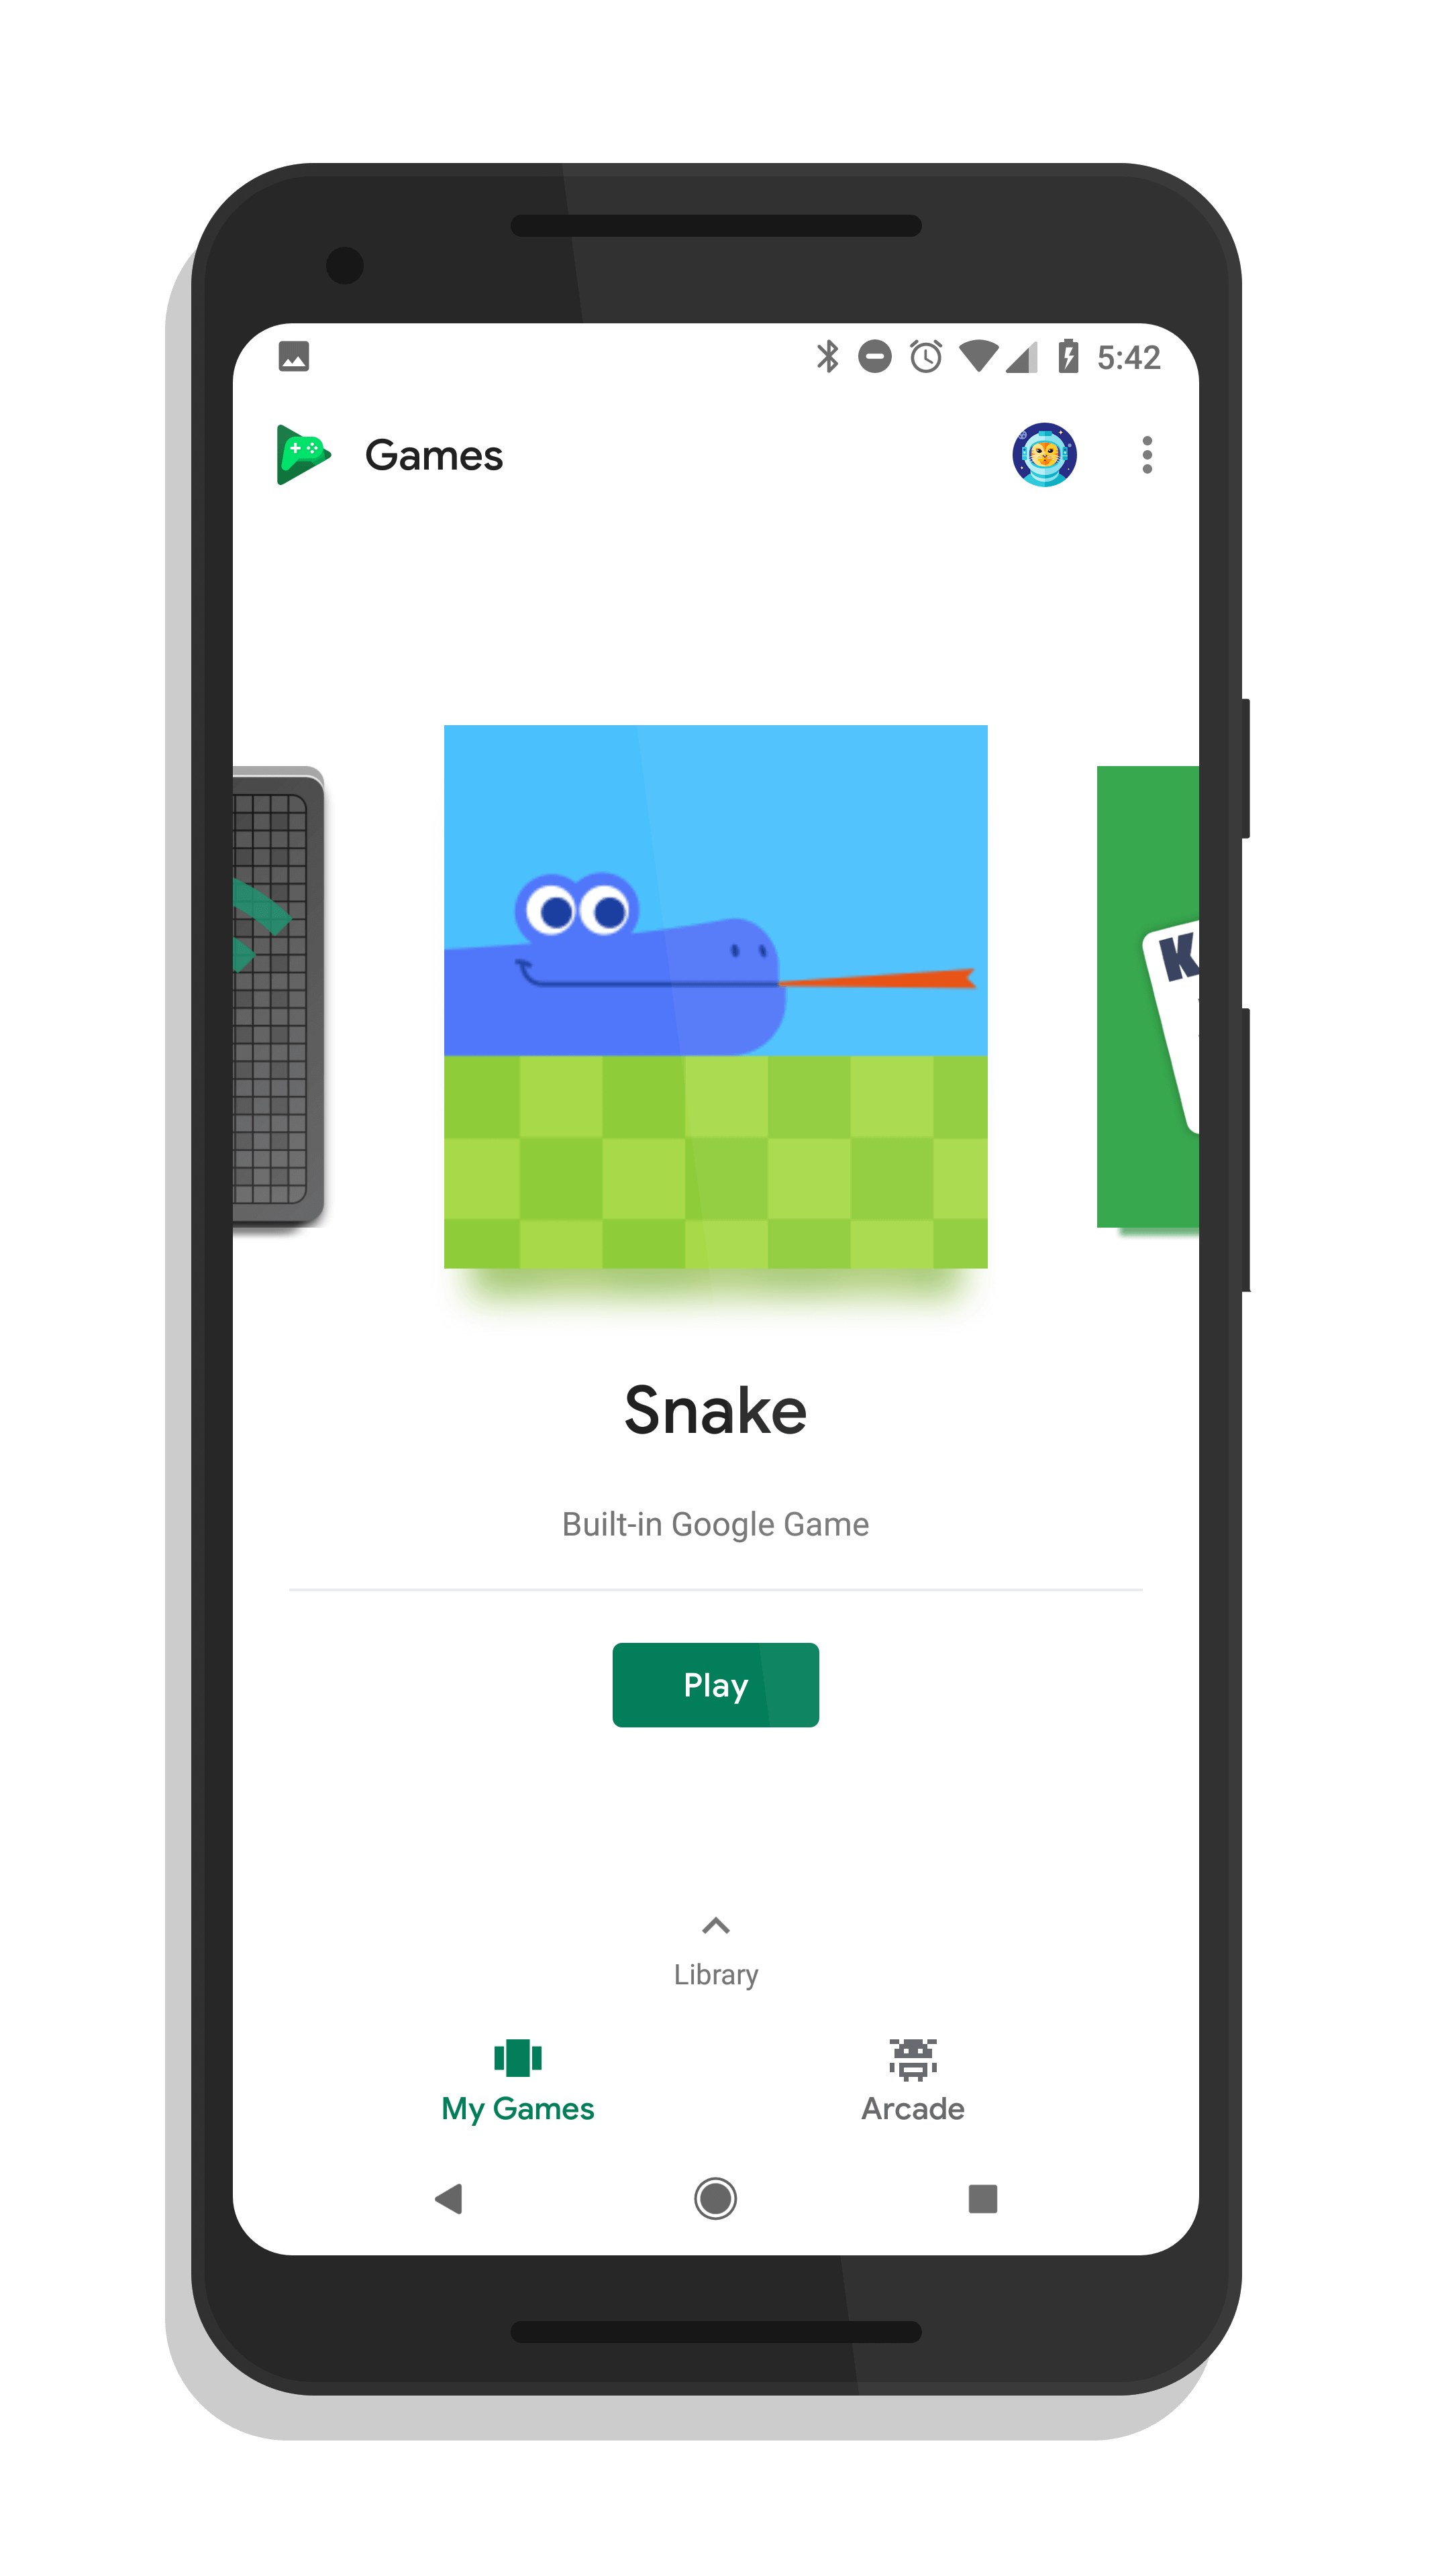 Google Play Games Update Brings Snake Game and New Search Functionality ...